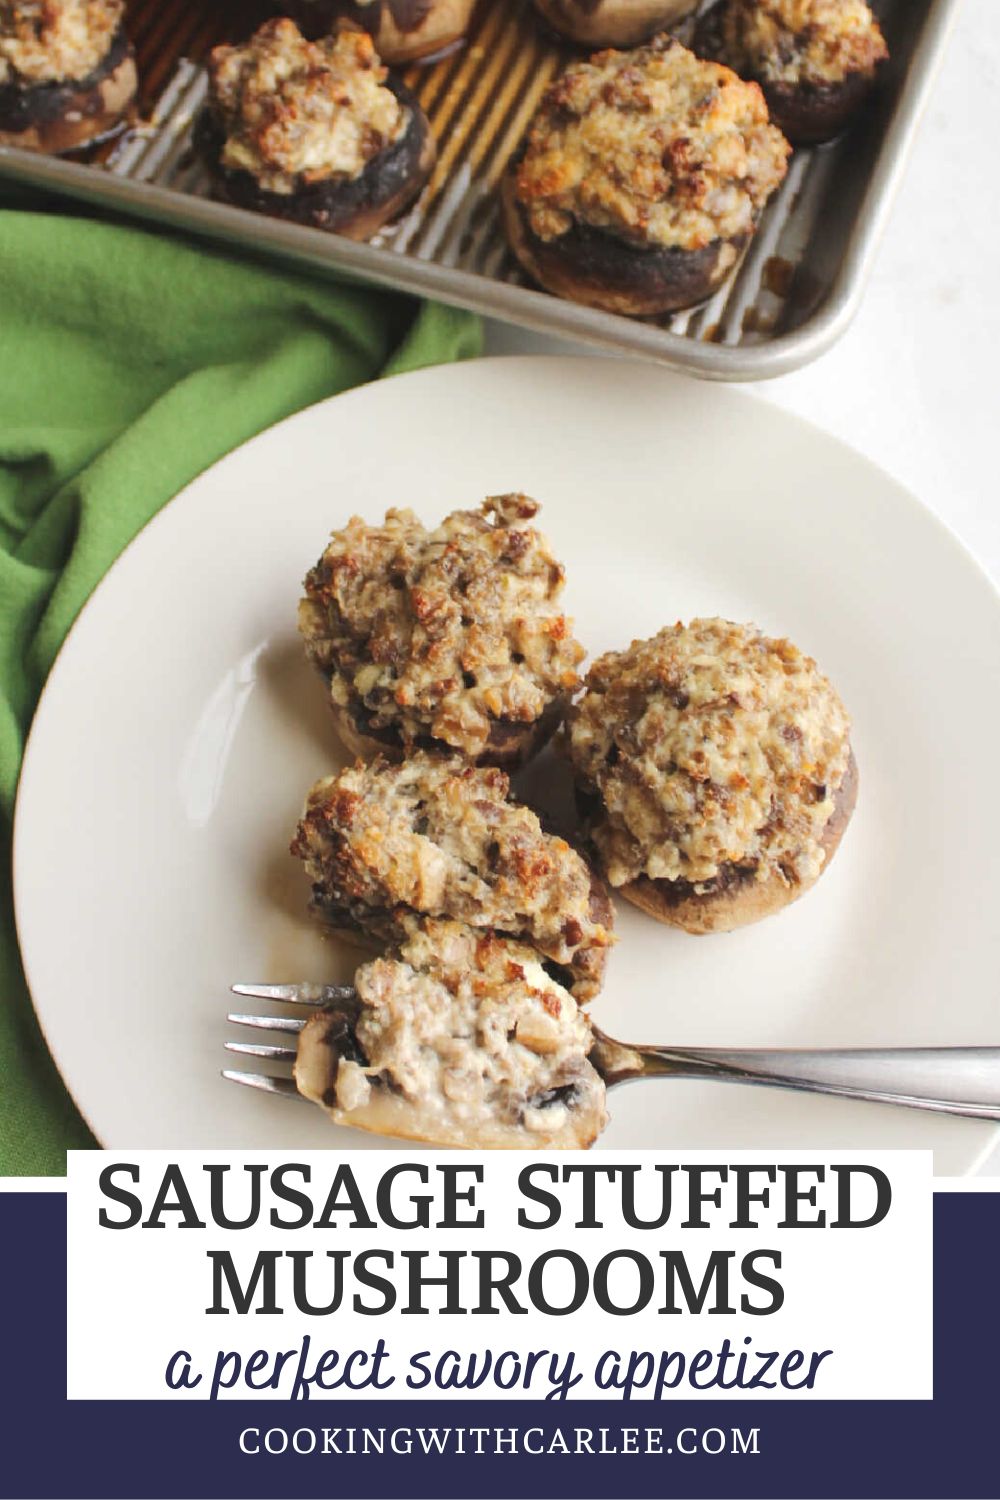 This easy stuffed mushroom recipe is one of the best appetizer recipes out there. This is the perfect savory finger food that will keep you coming back for more.